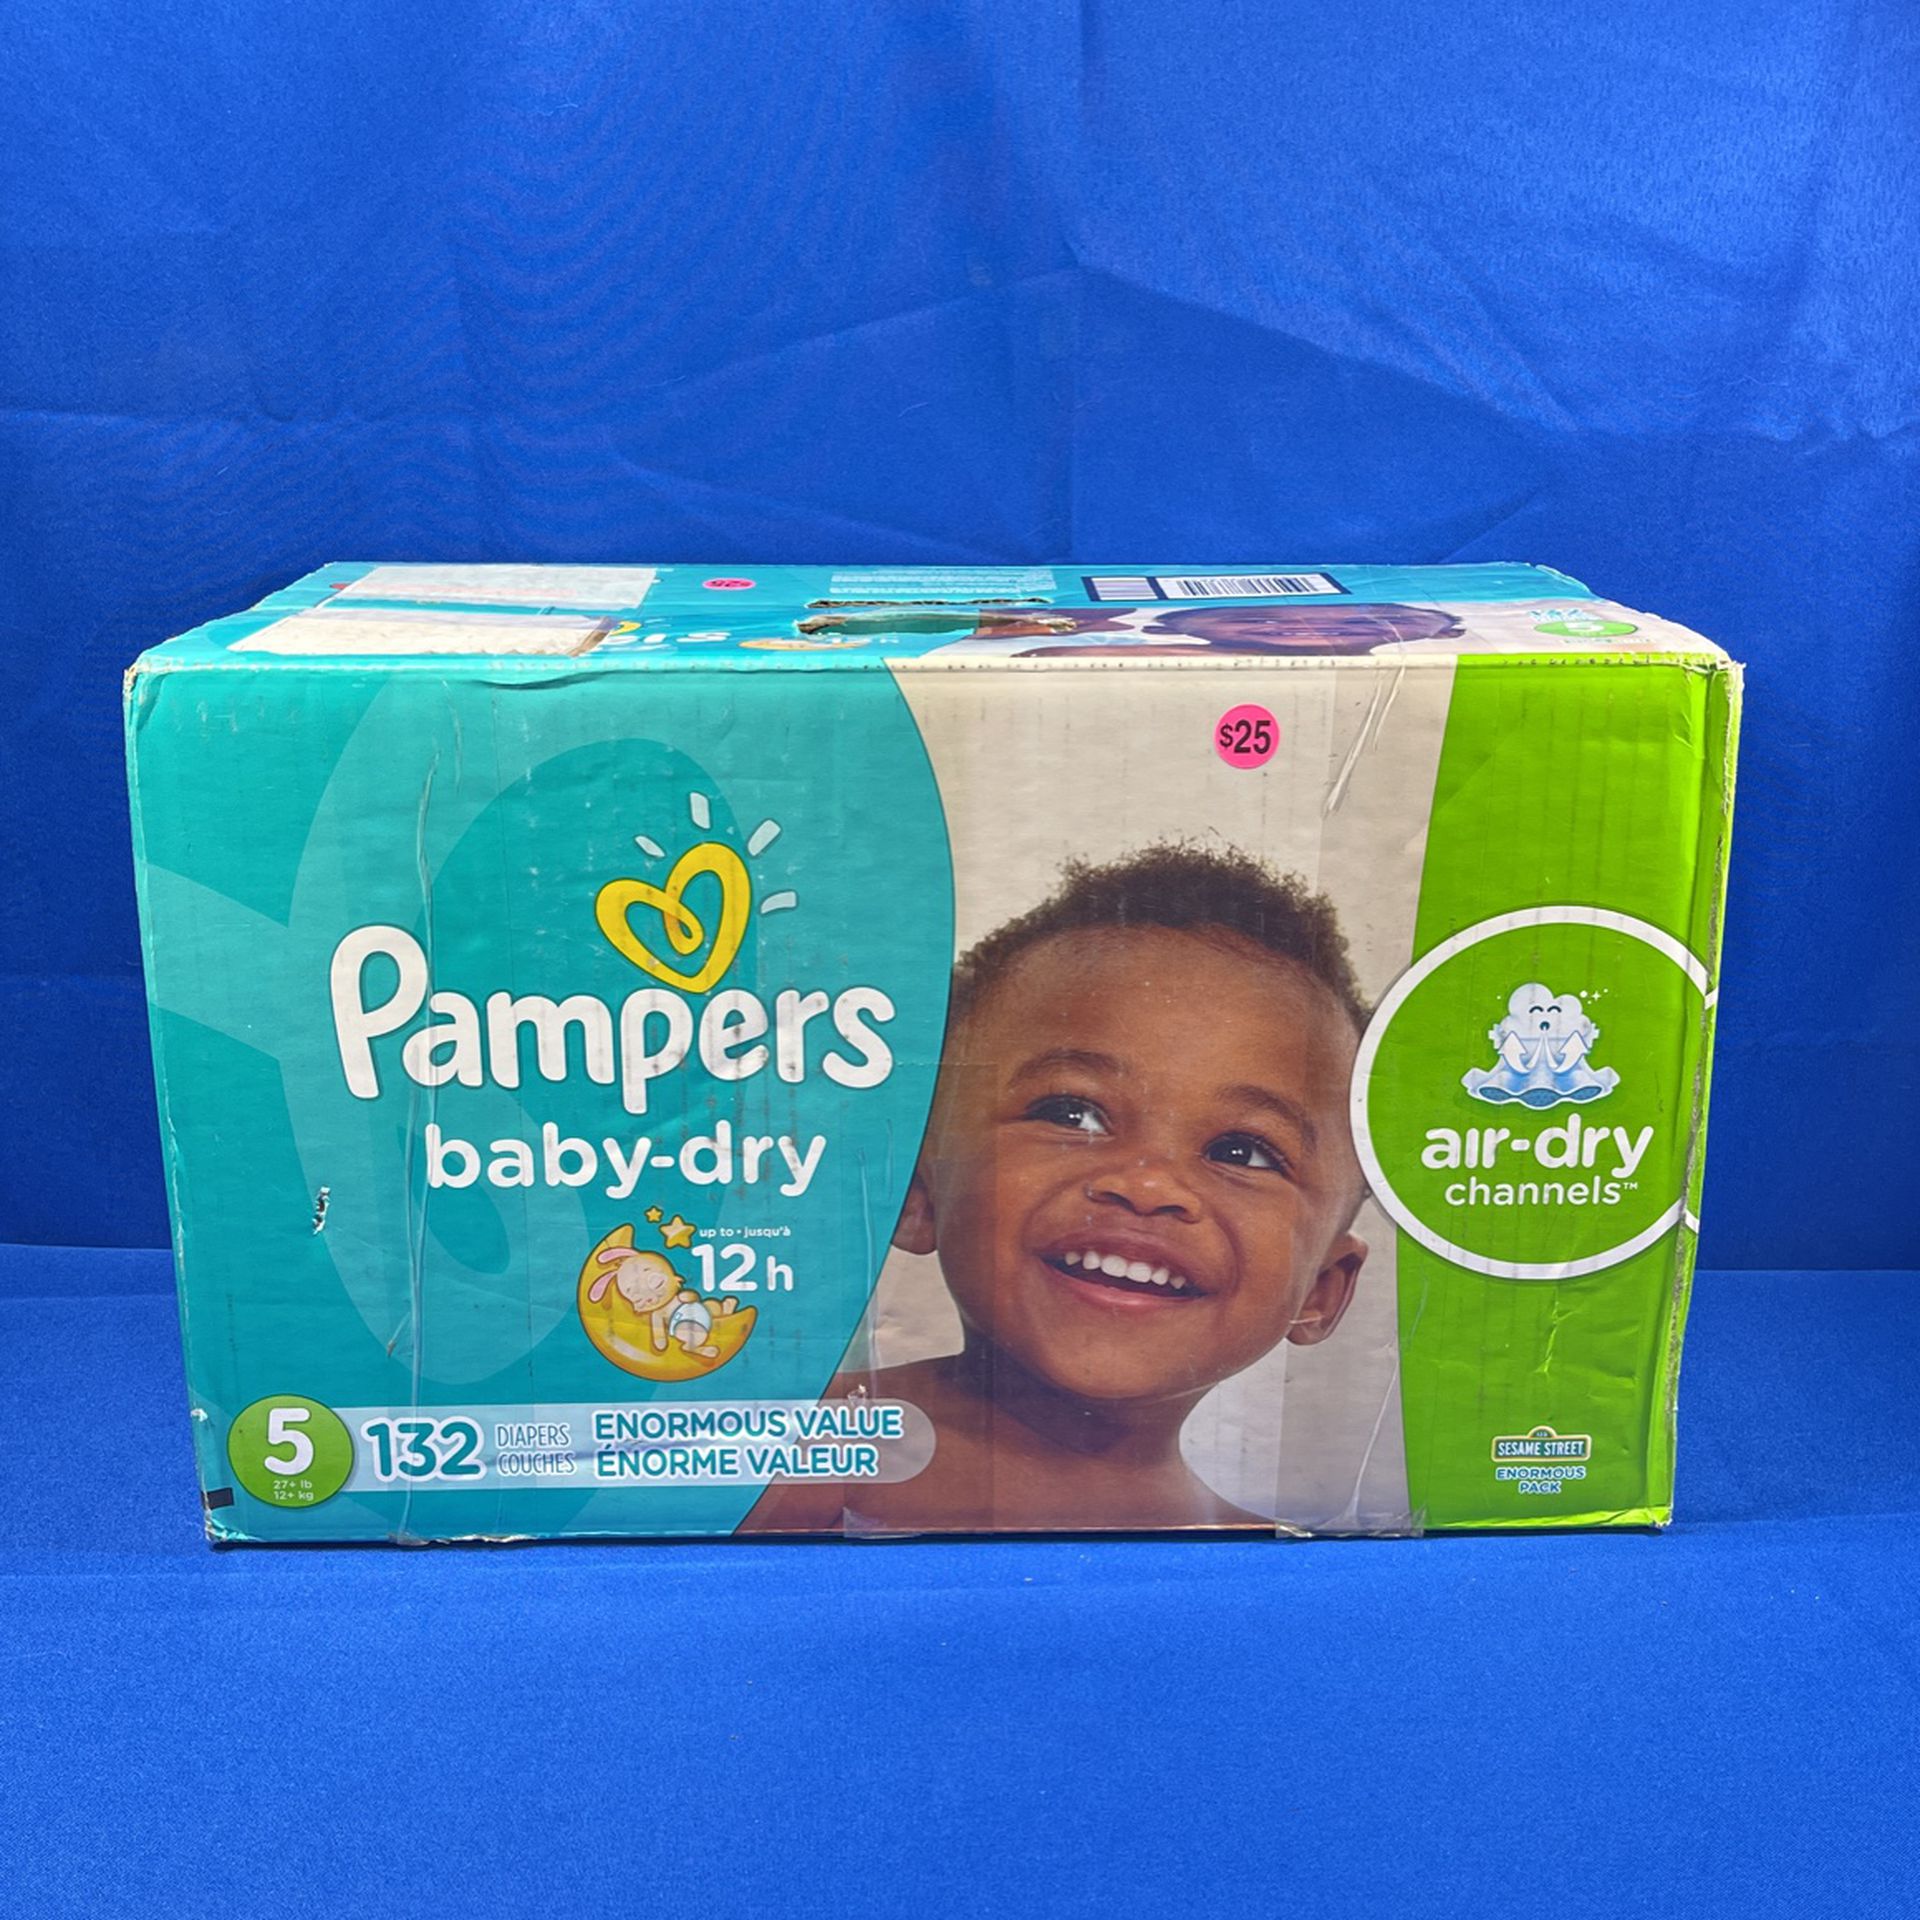 Pampers Size 5 Diapers - 132 Box Baby Dry $43 MSRP